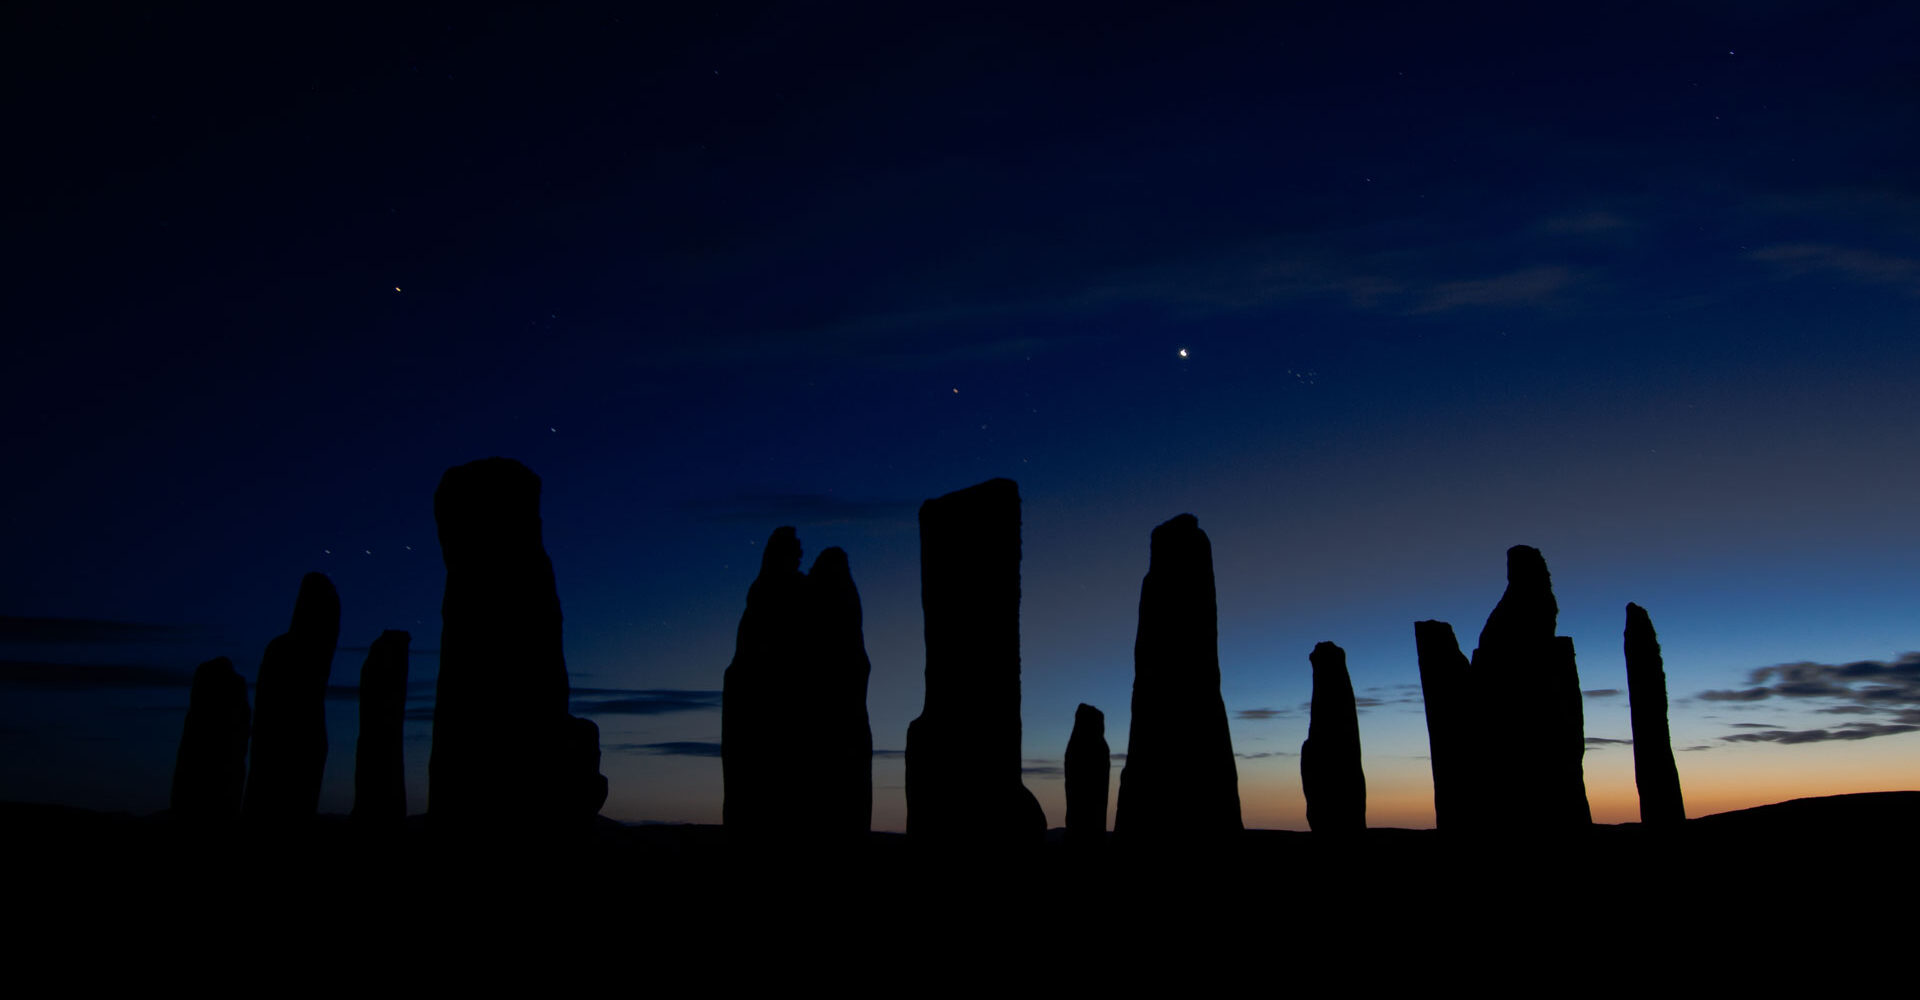 A silhouette of the Callanish Stones in Scotland at dusk